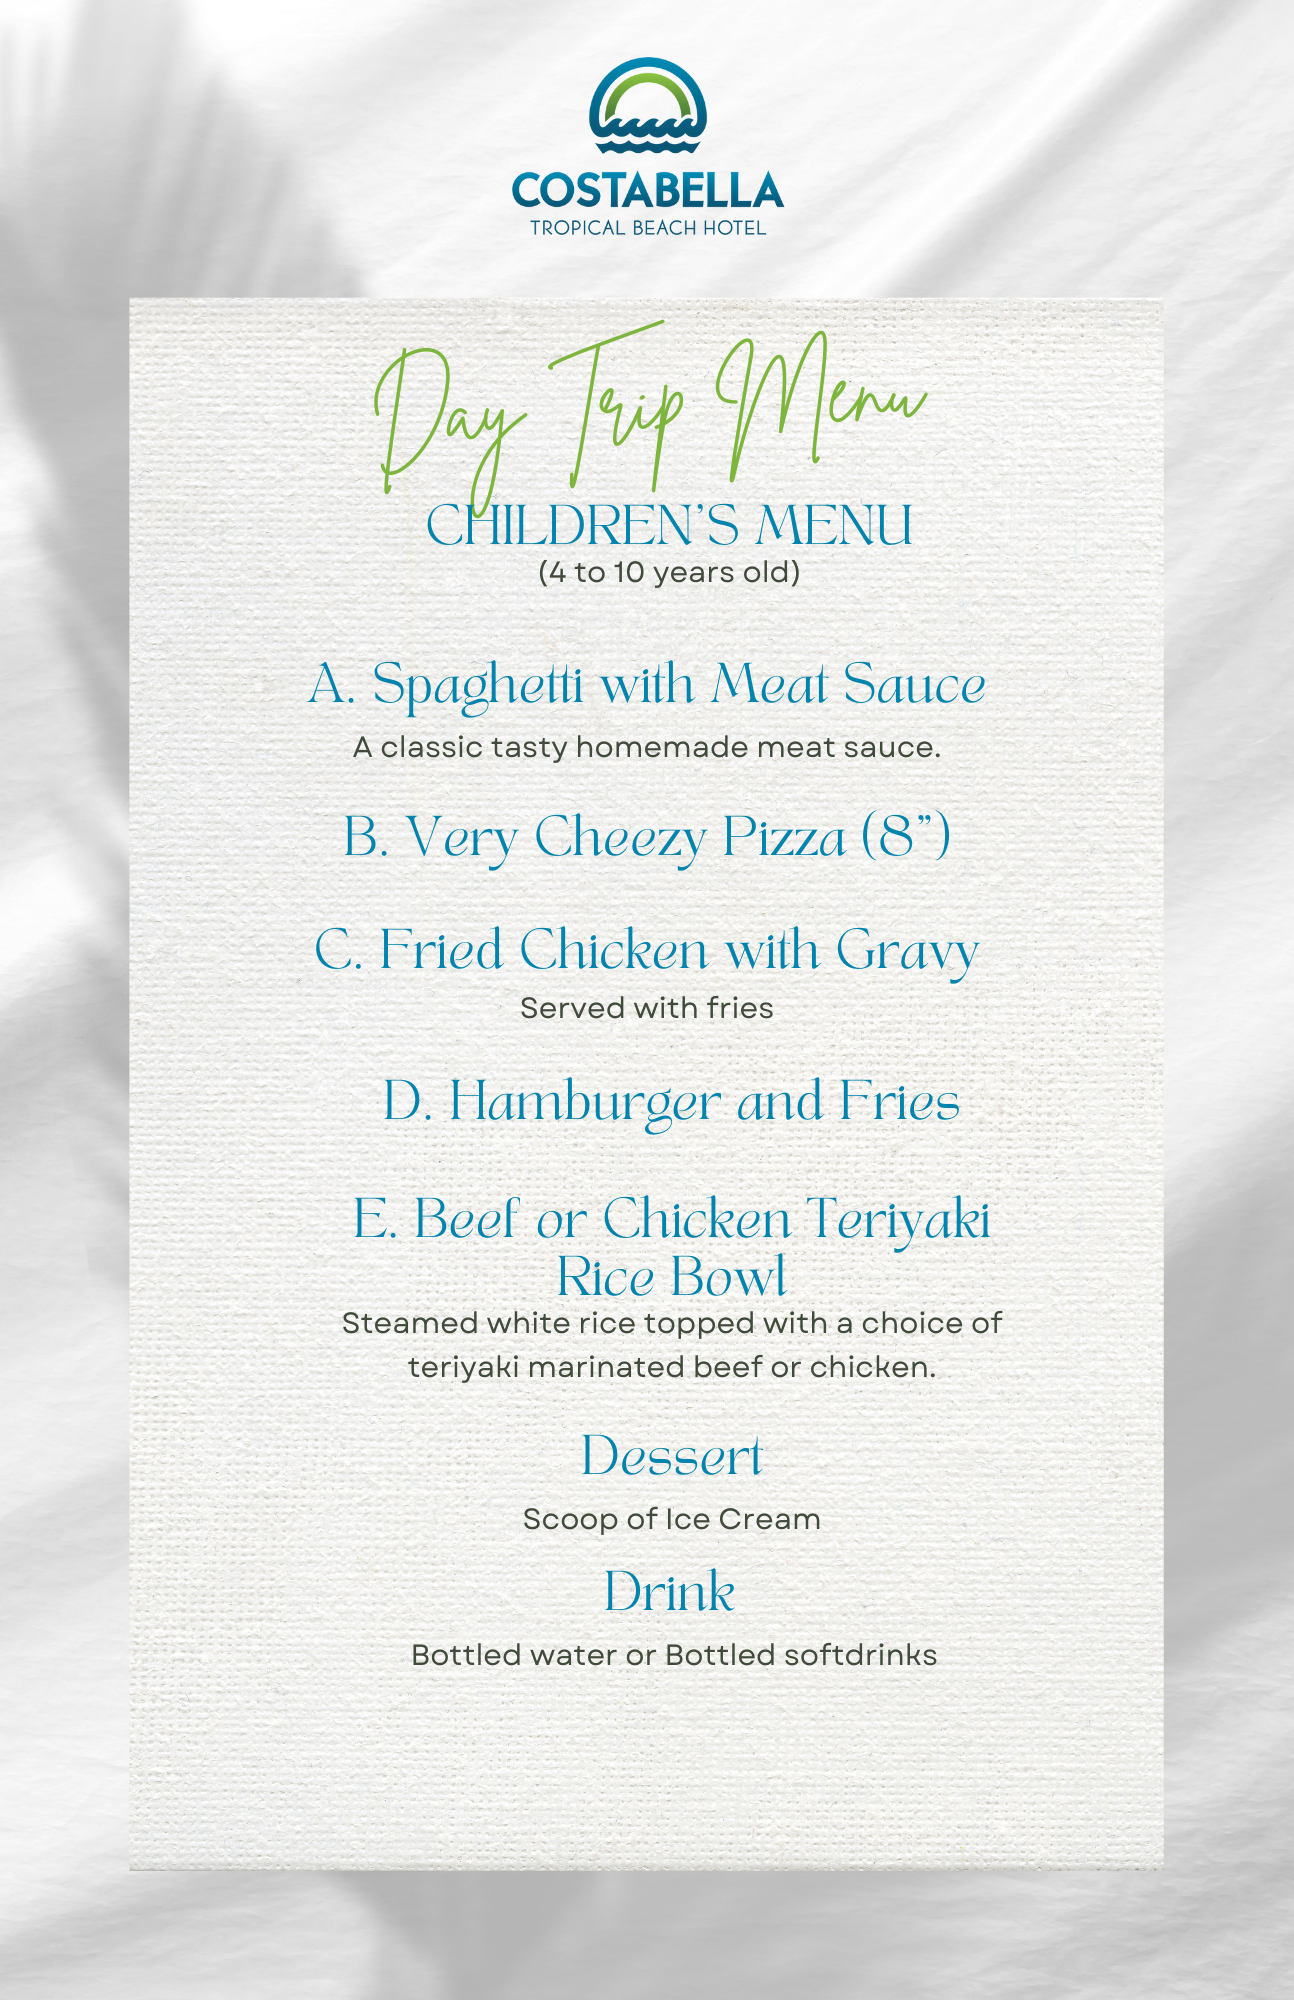 Kids will enjoy a delicious lunch from the Day Trip Menu for Children